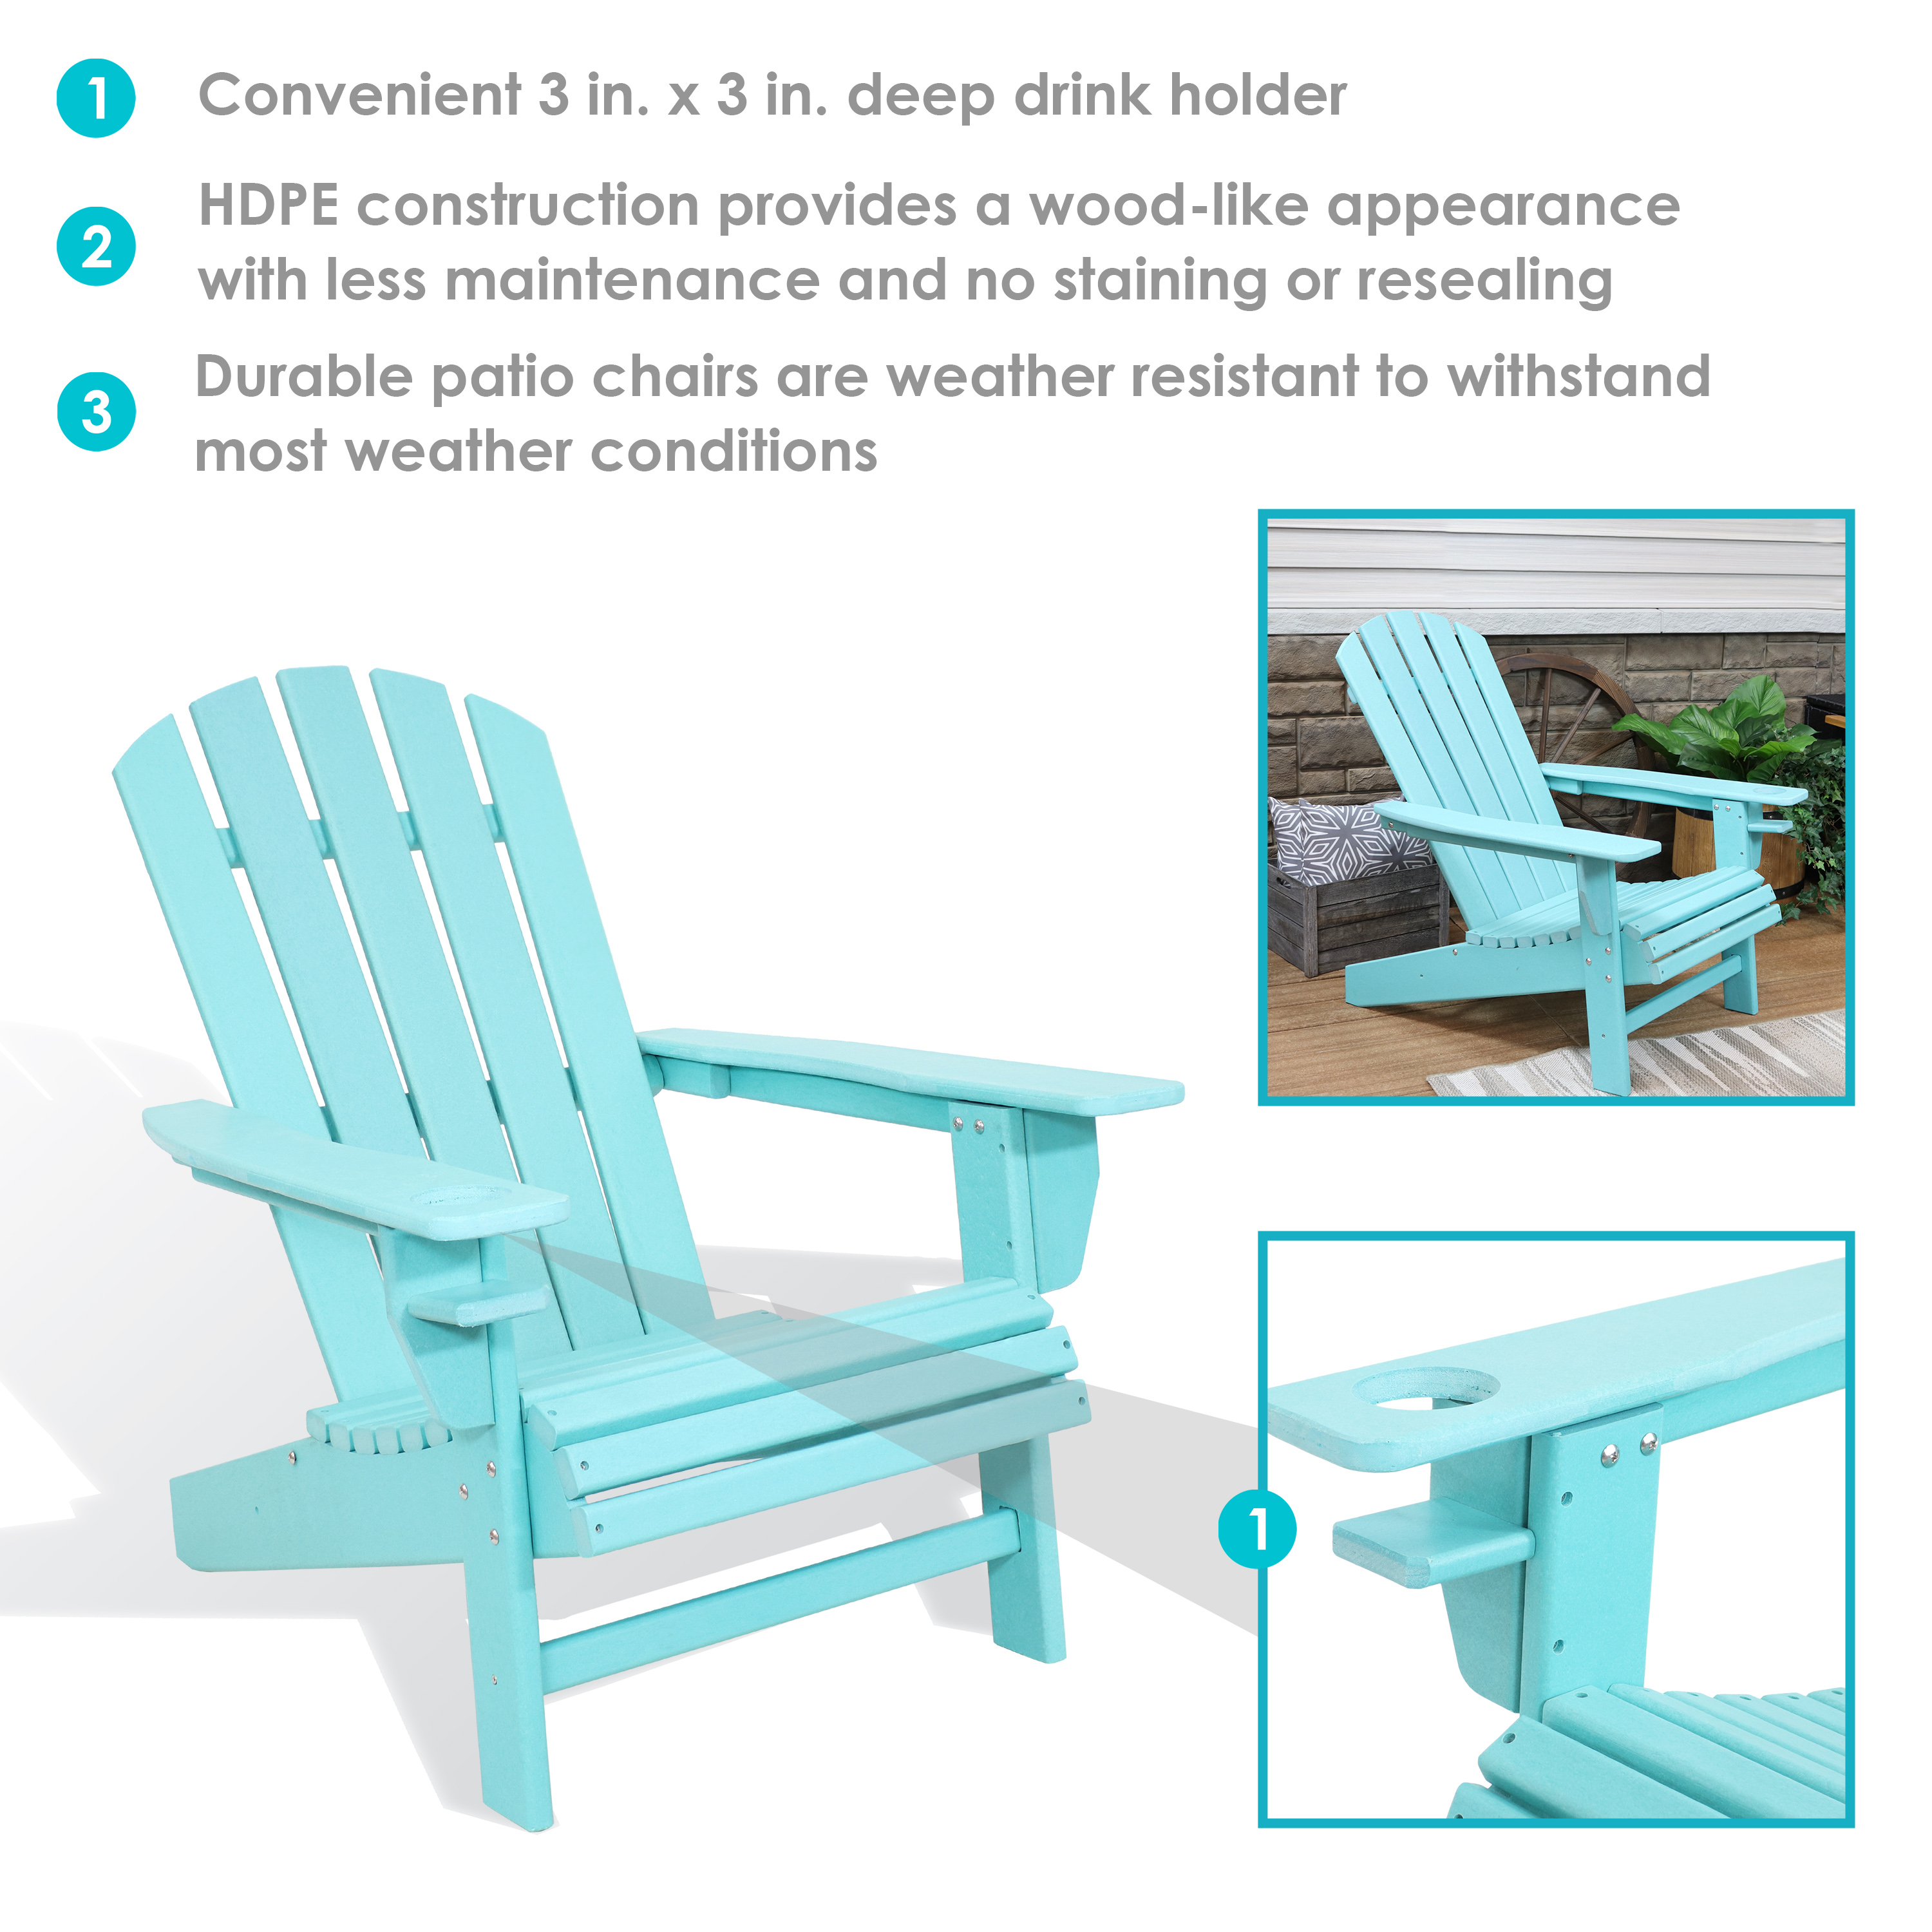 Sunnydaze All-Weather Outdoor Adirondack Chair with Drink Holder - Turquoise - Set of 2 - image 4 of 11